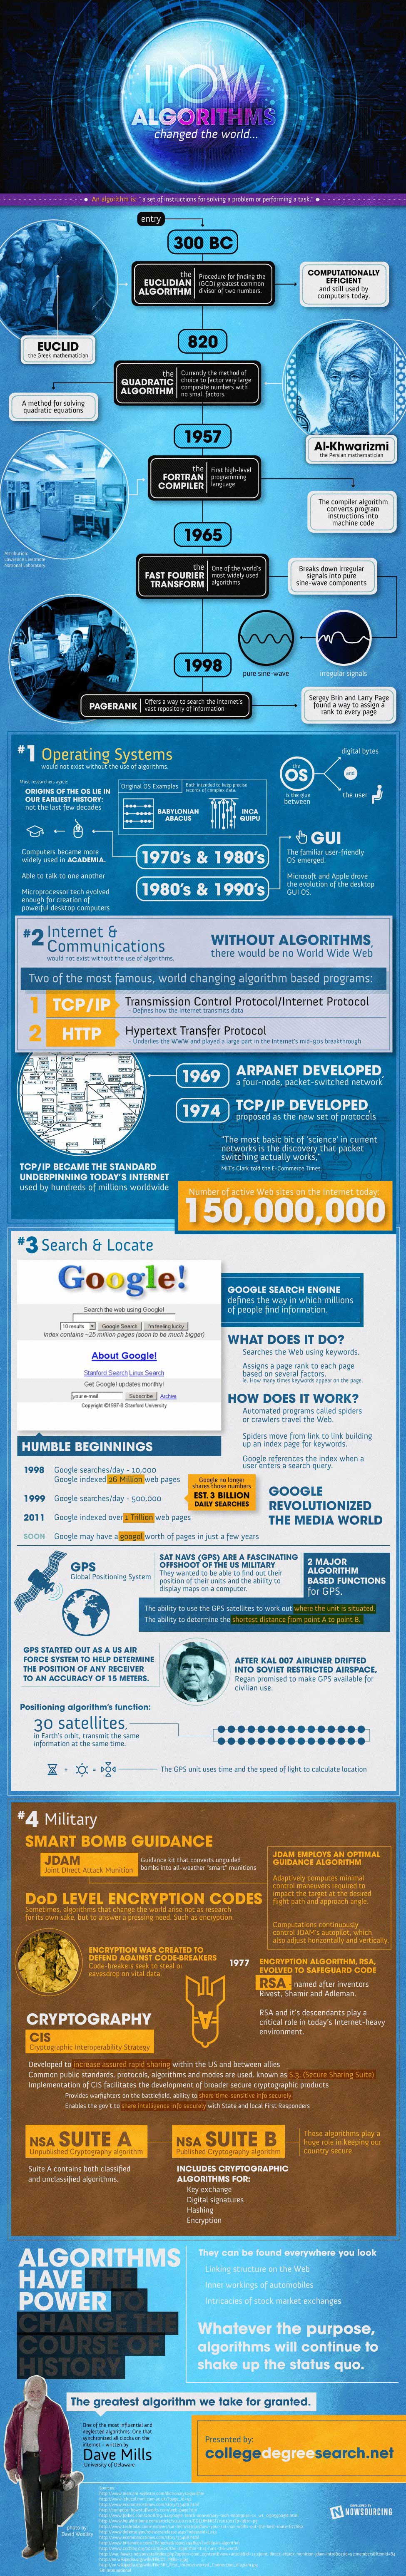 Algorithms Rule the World-Infographic